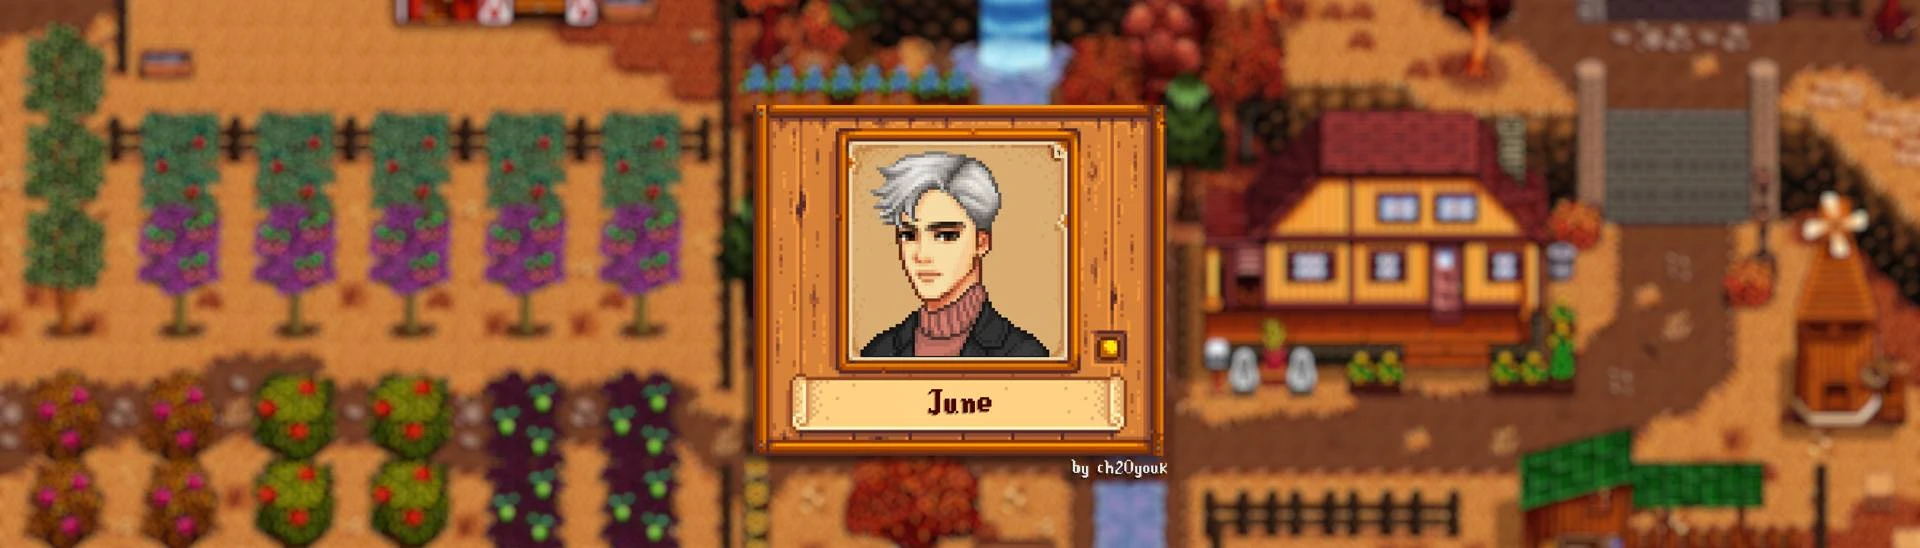 New NPCs Info - Gift Tastes and Heart Events at Stardew Valley Nexus - Mods  and community